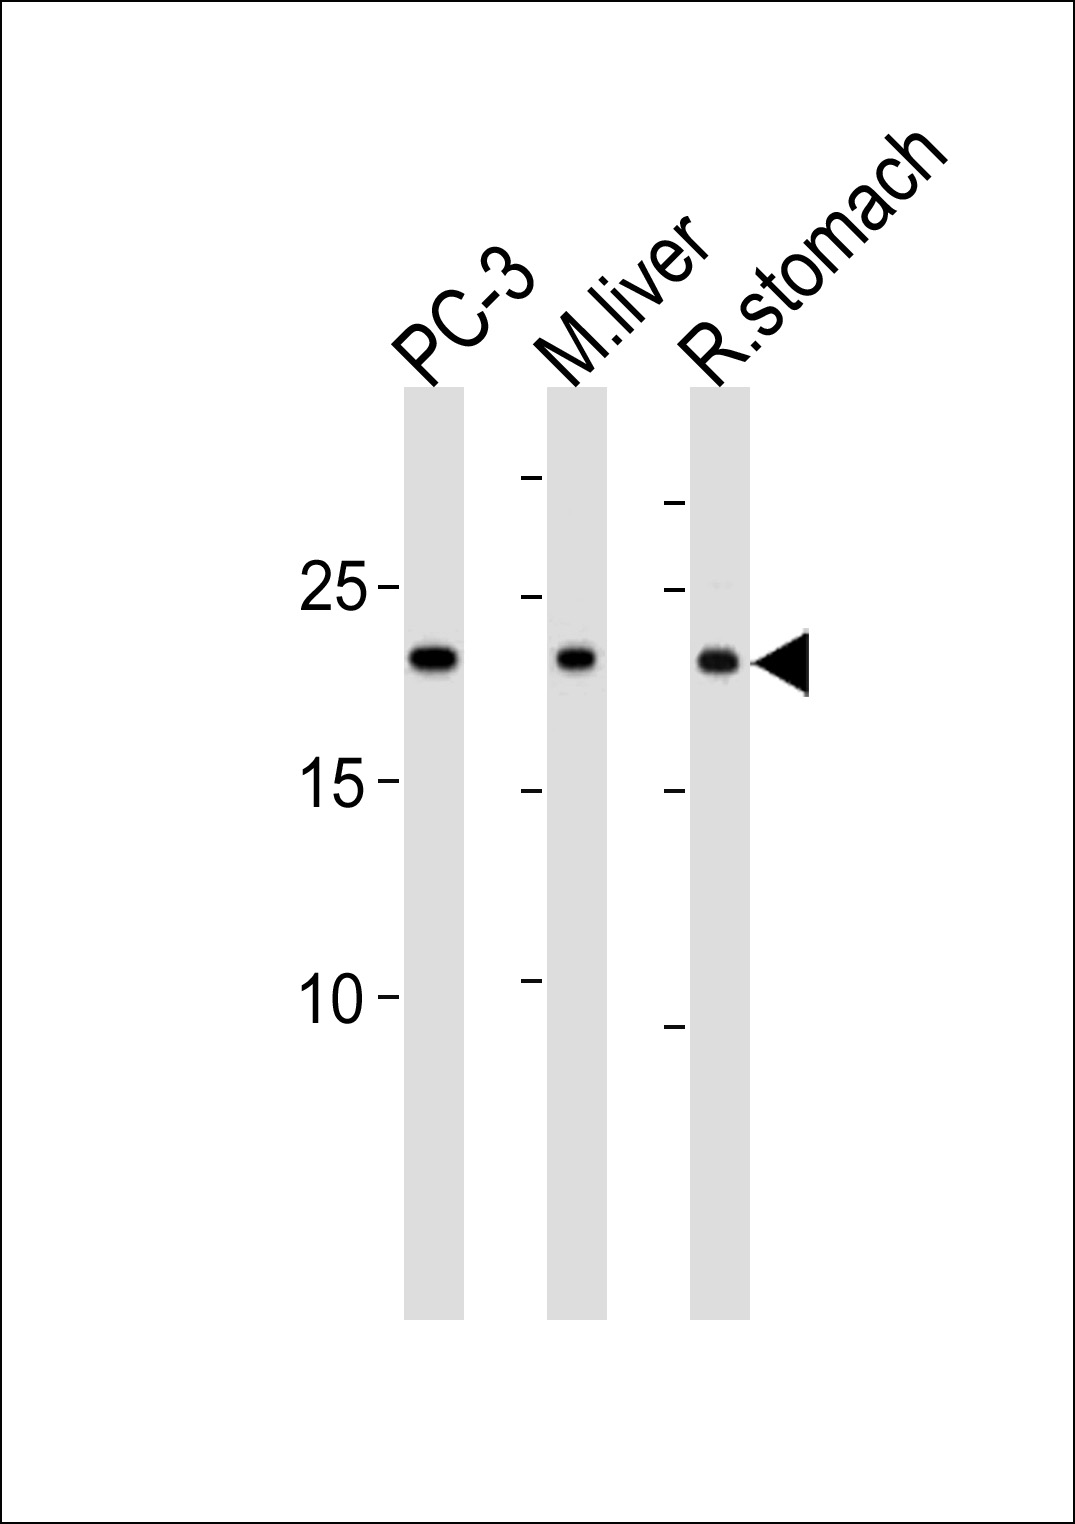 PSMB2 Antibody (C-term) (Cat. #AP20507b) western blot analysis in PC-3 cell line,mouse liver and rat stomach tissue lysates (35ug/lane).This demonstrates the PSMB2 antibody detected the PSMB2 protein (arrow).